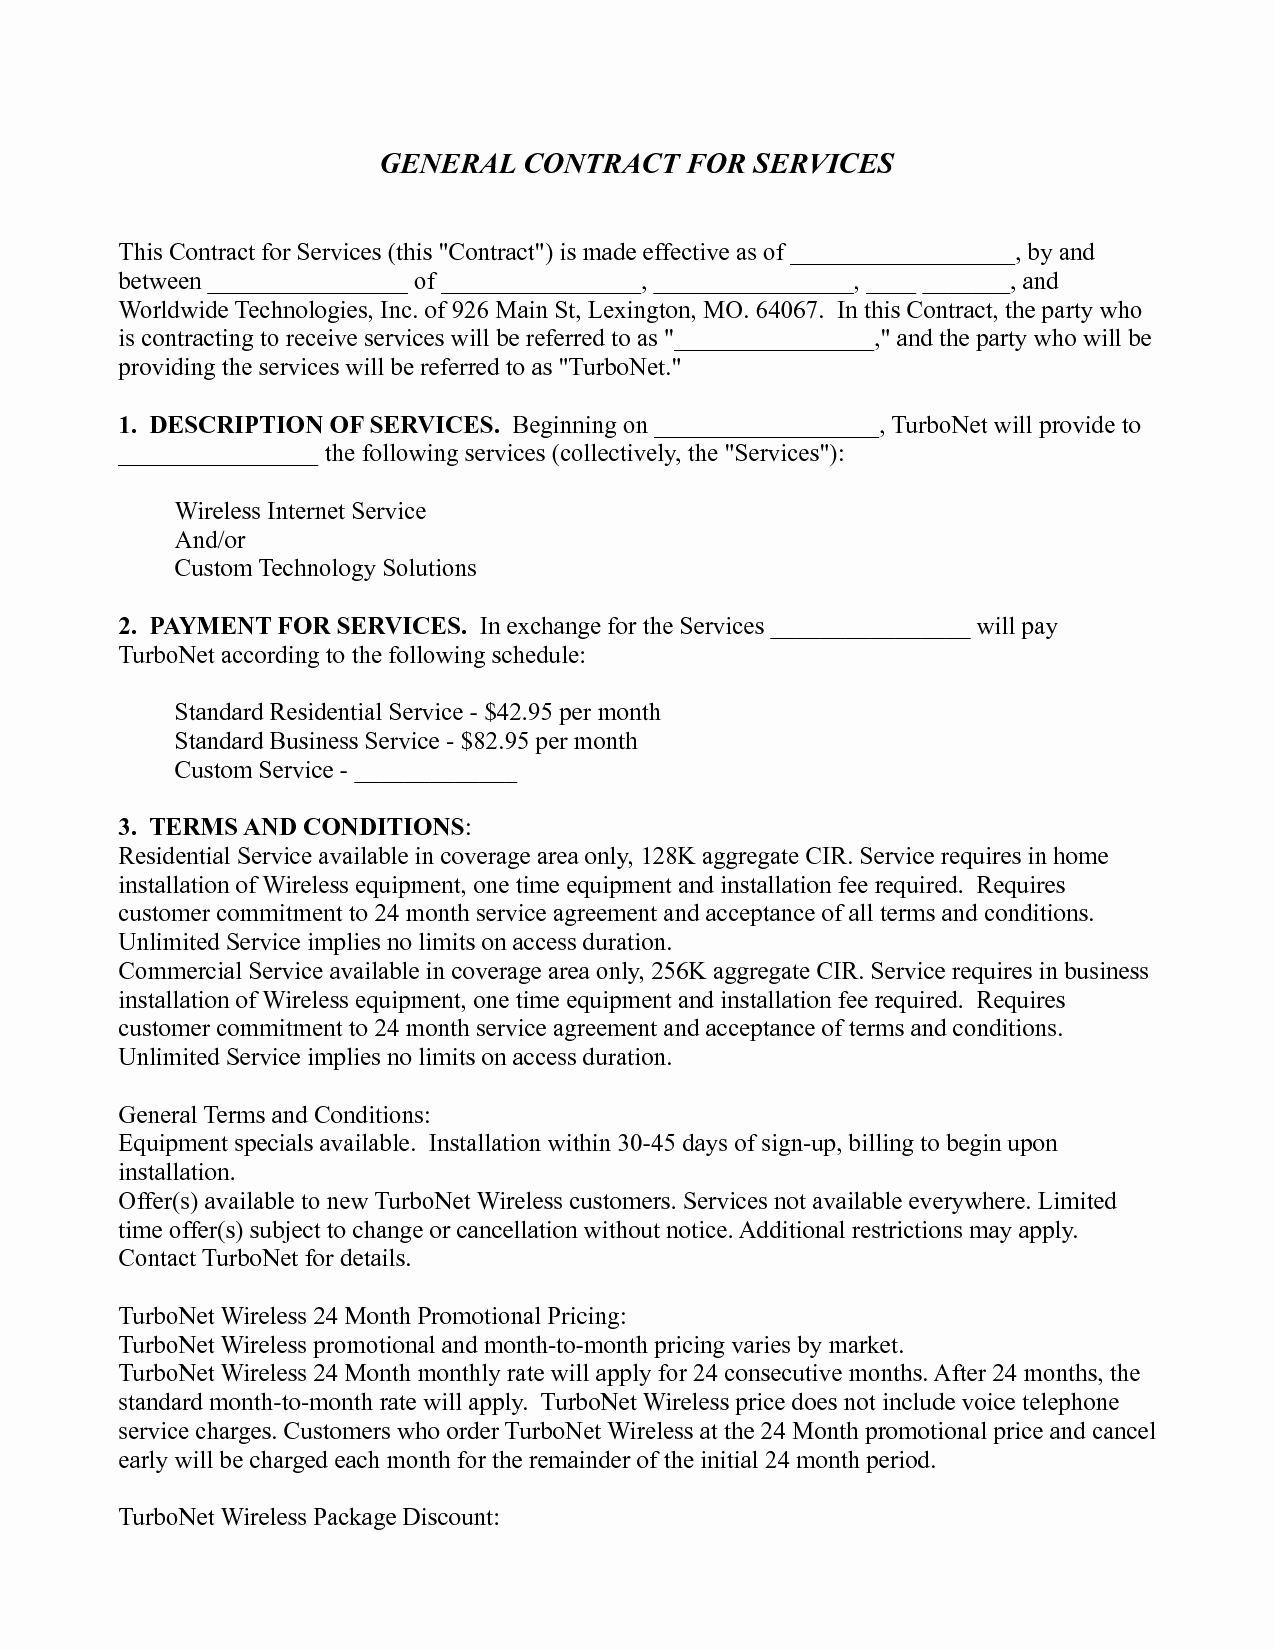 Service Contract Template Doc New General Service Contract by Emm General Contract for Services Template